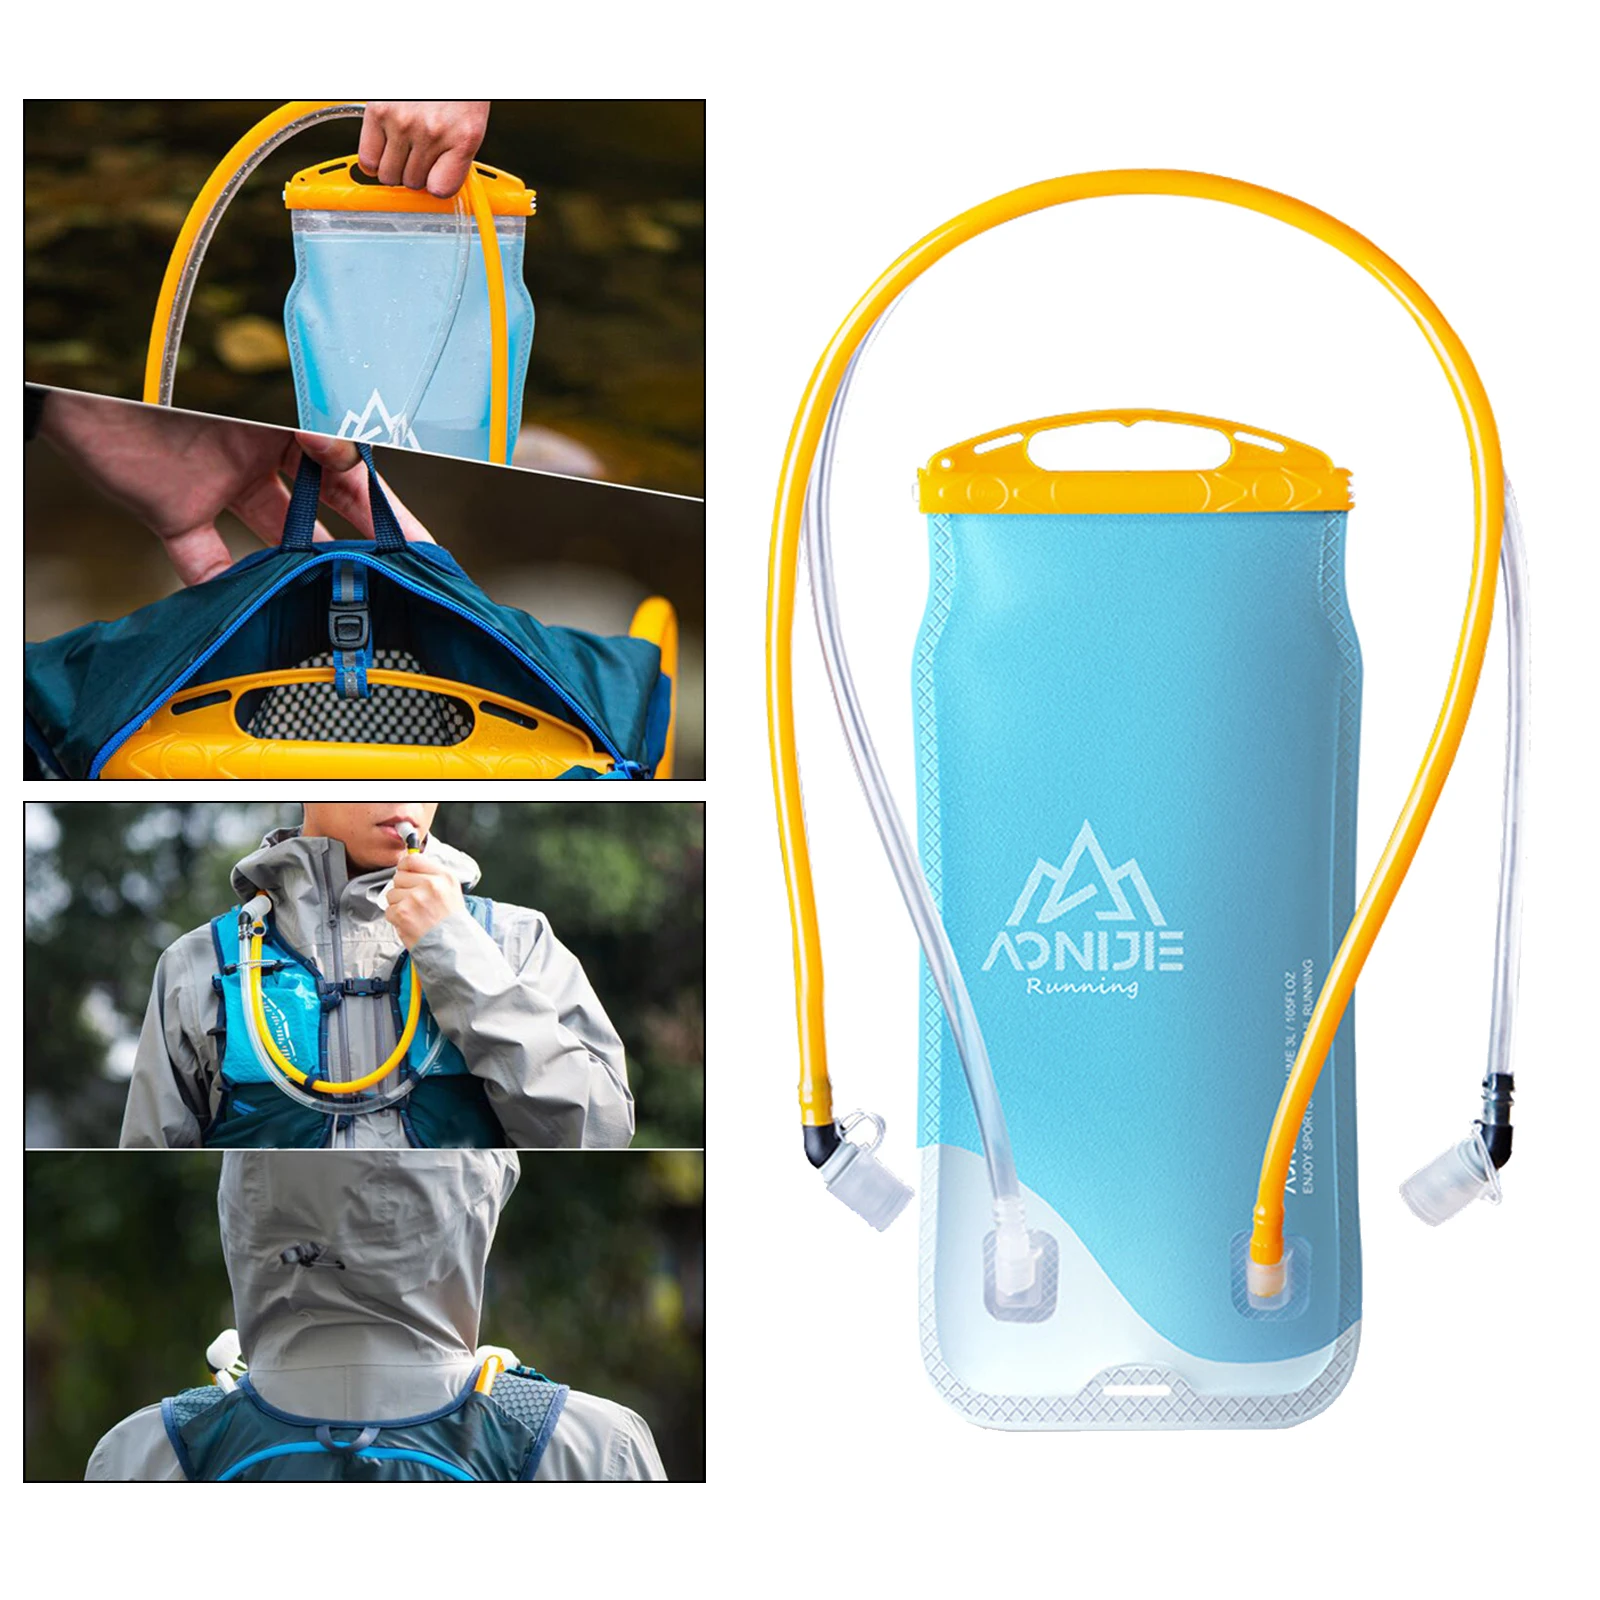 Dual Hydration Bladder, Replacement Reservoir for Most Backpacks, Carry Water and Electrolytes